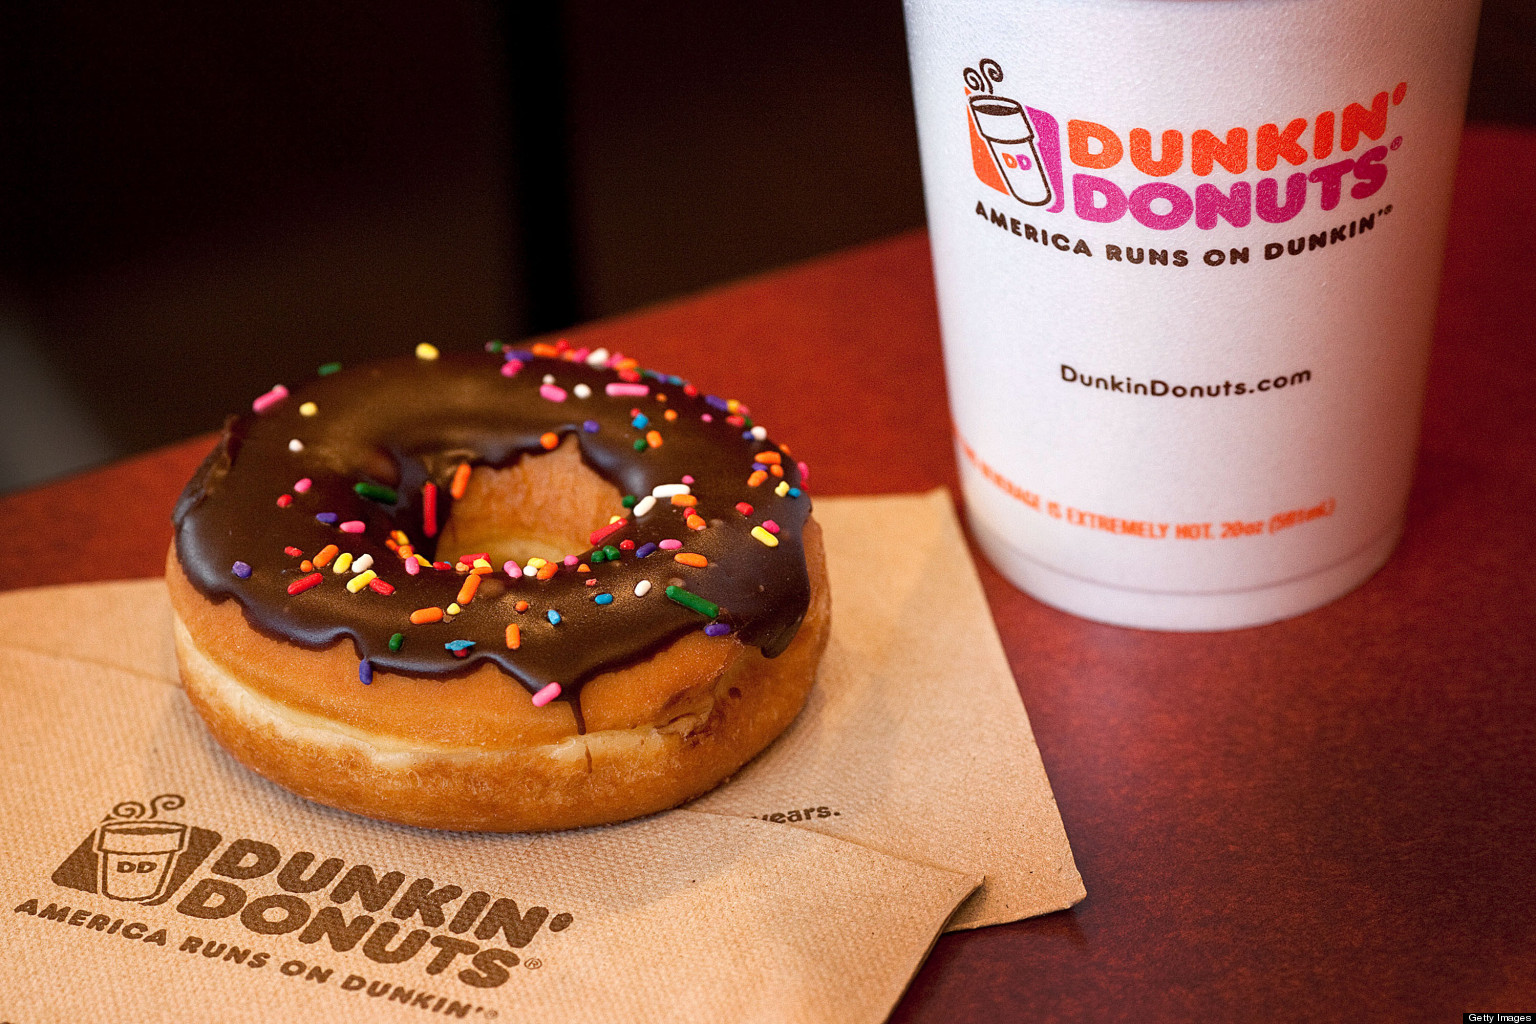 Dunkin' Donuts In Certain Boston Areas Stay Open To Serve Police During